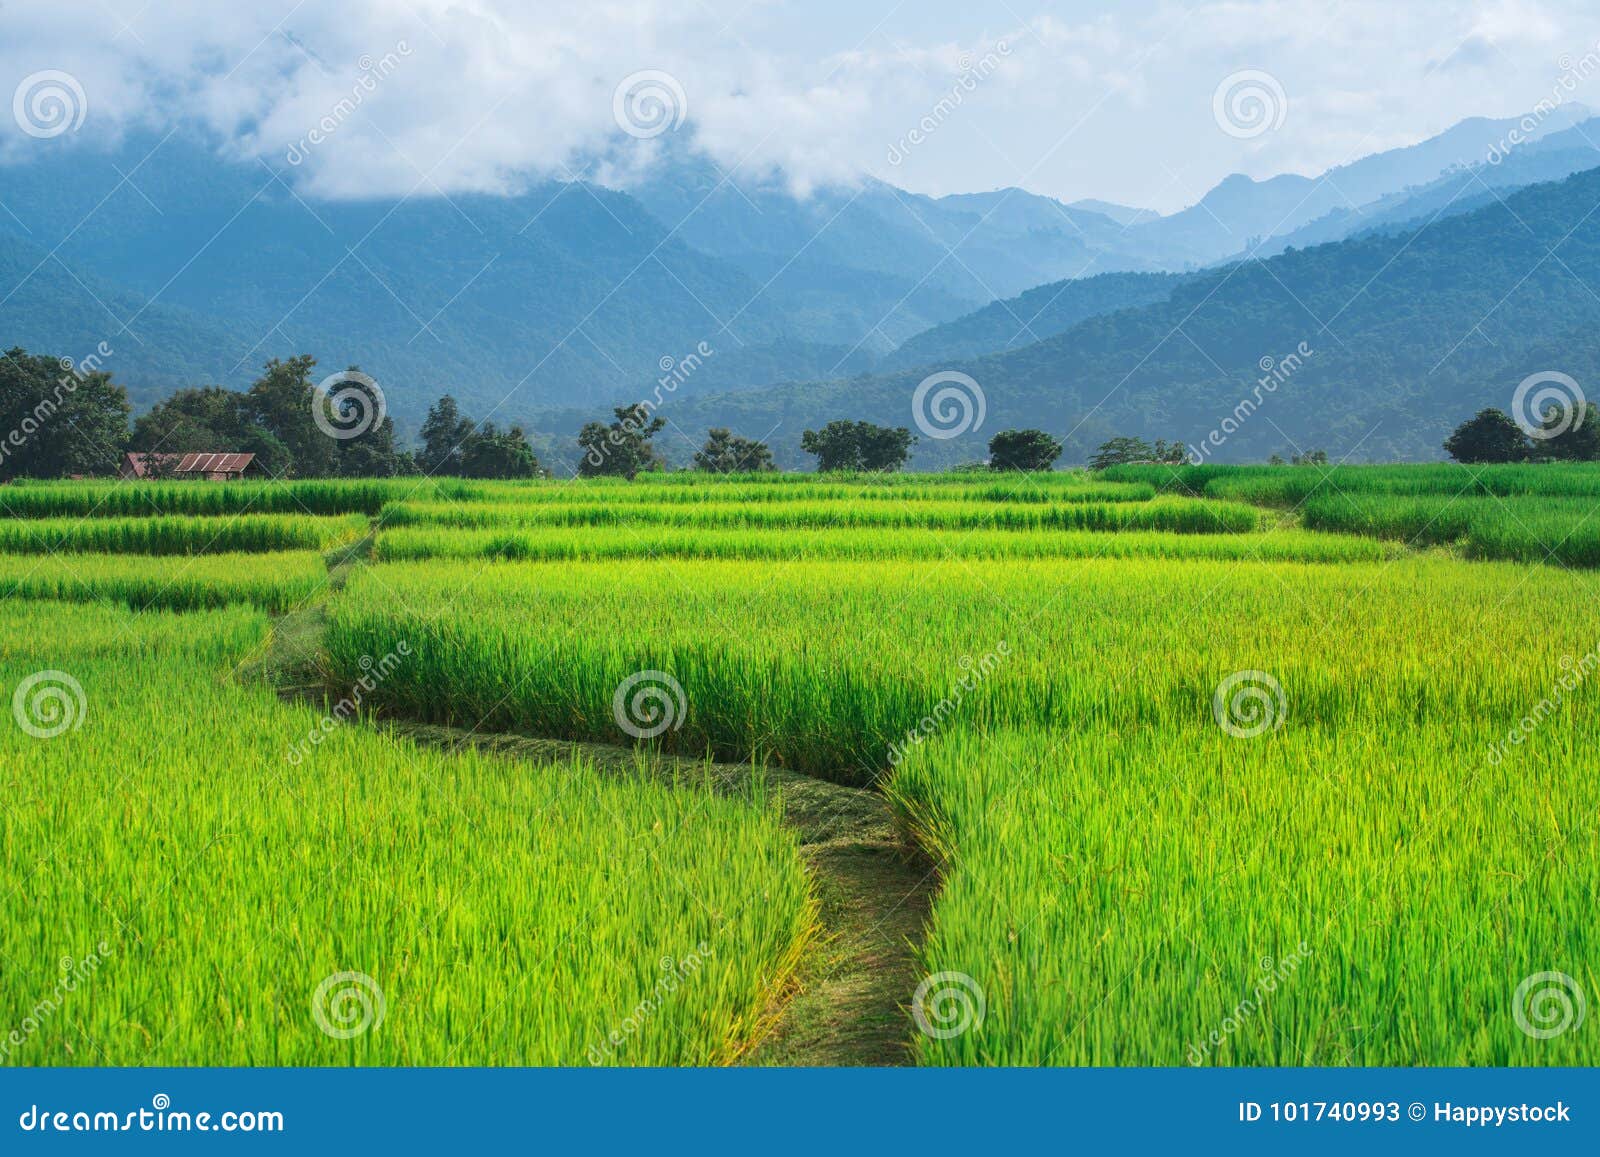 Rice Field Way on Green Field Background Stock Image - Image of view,  green: 101740993